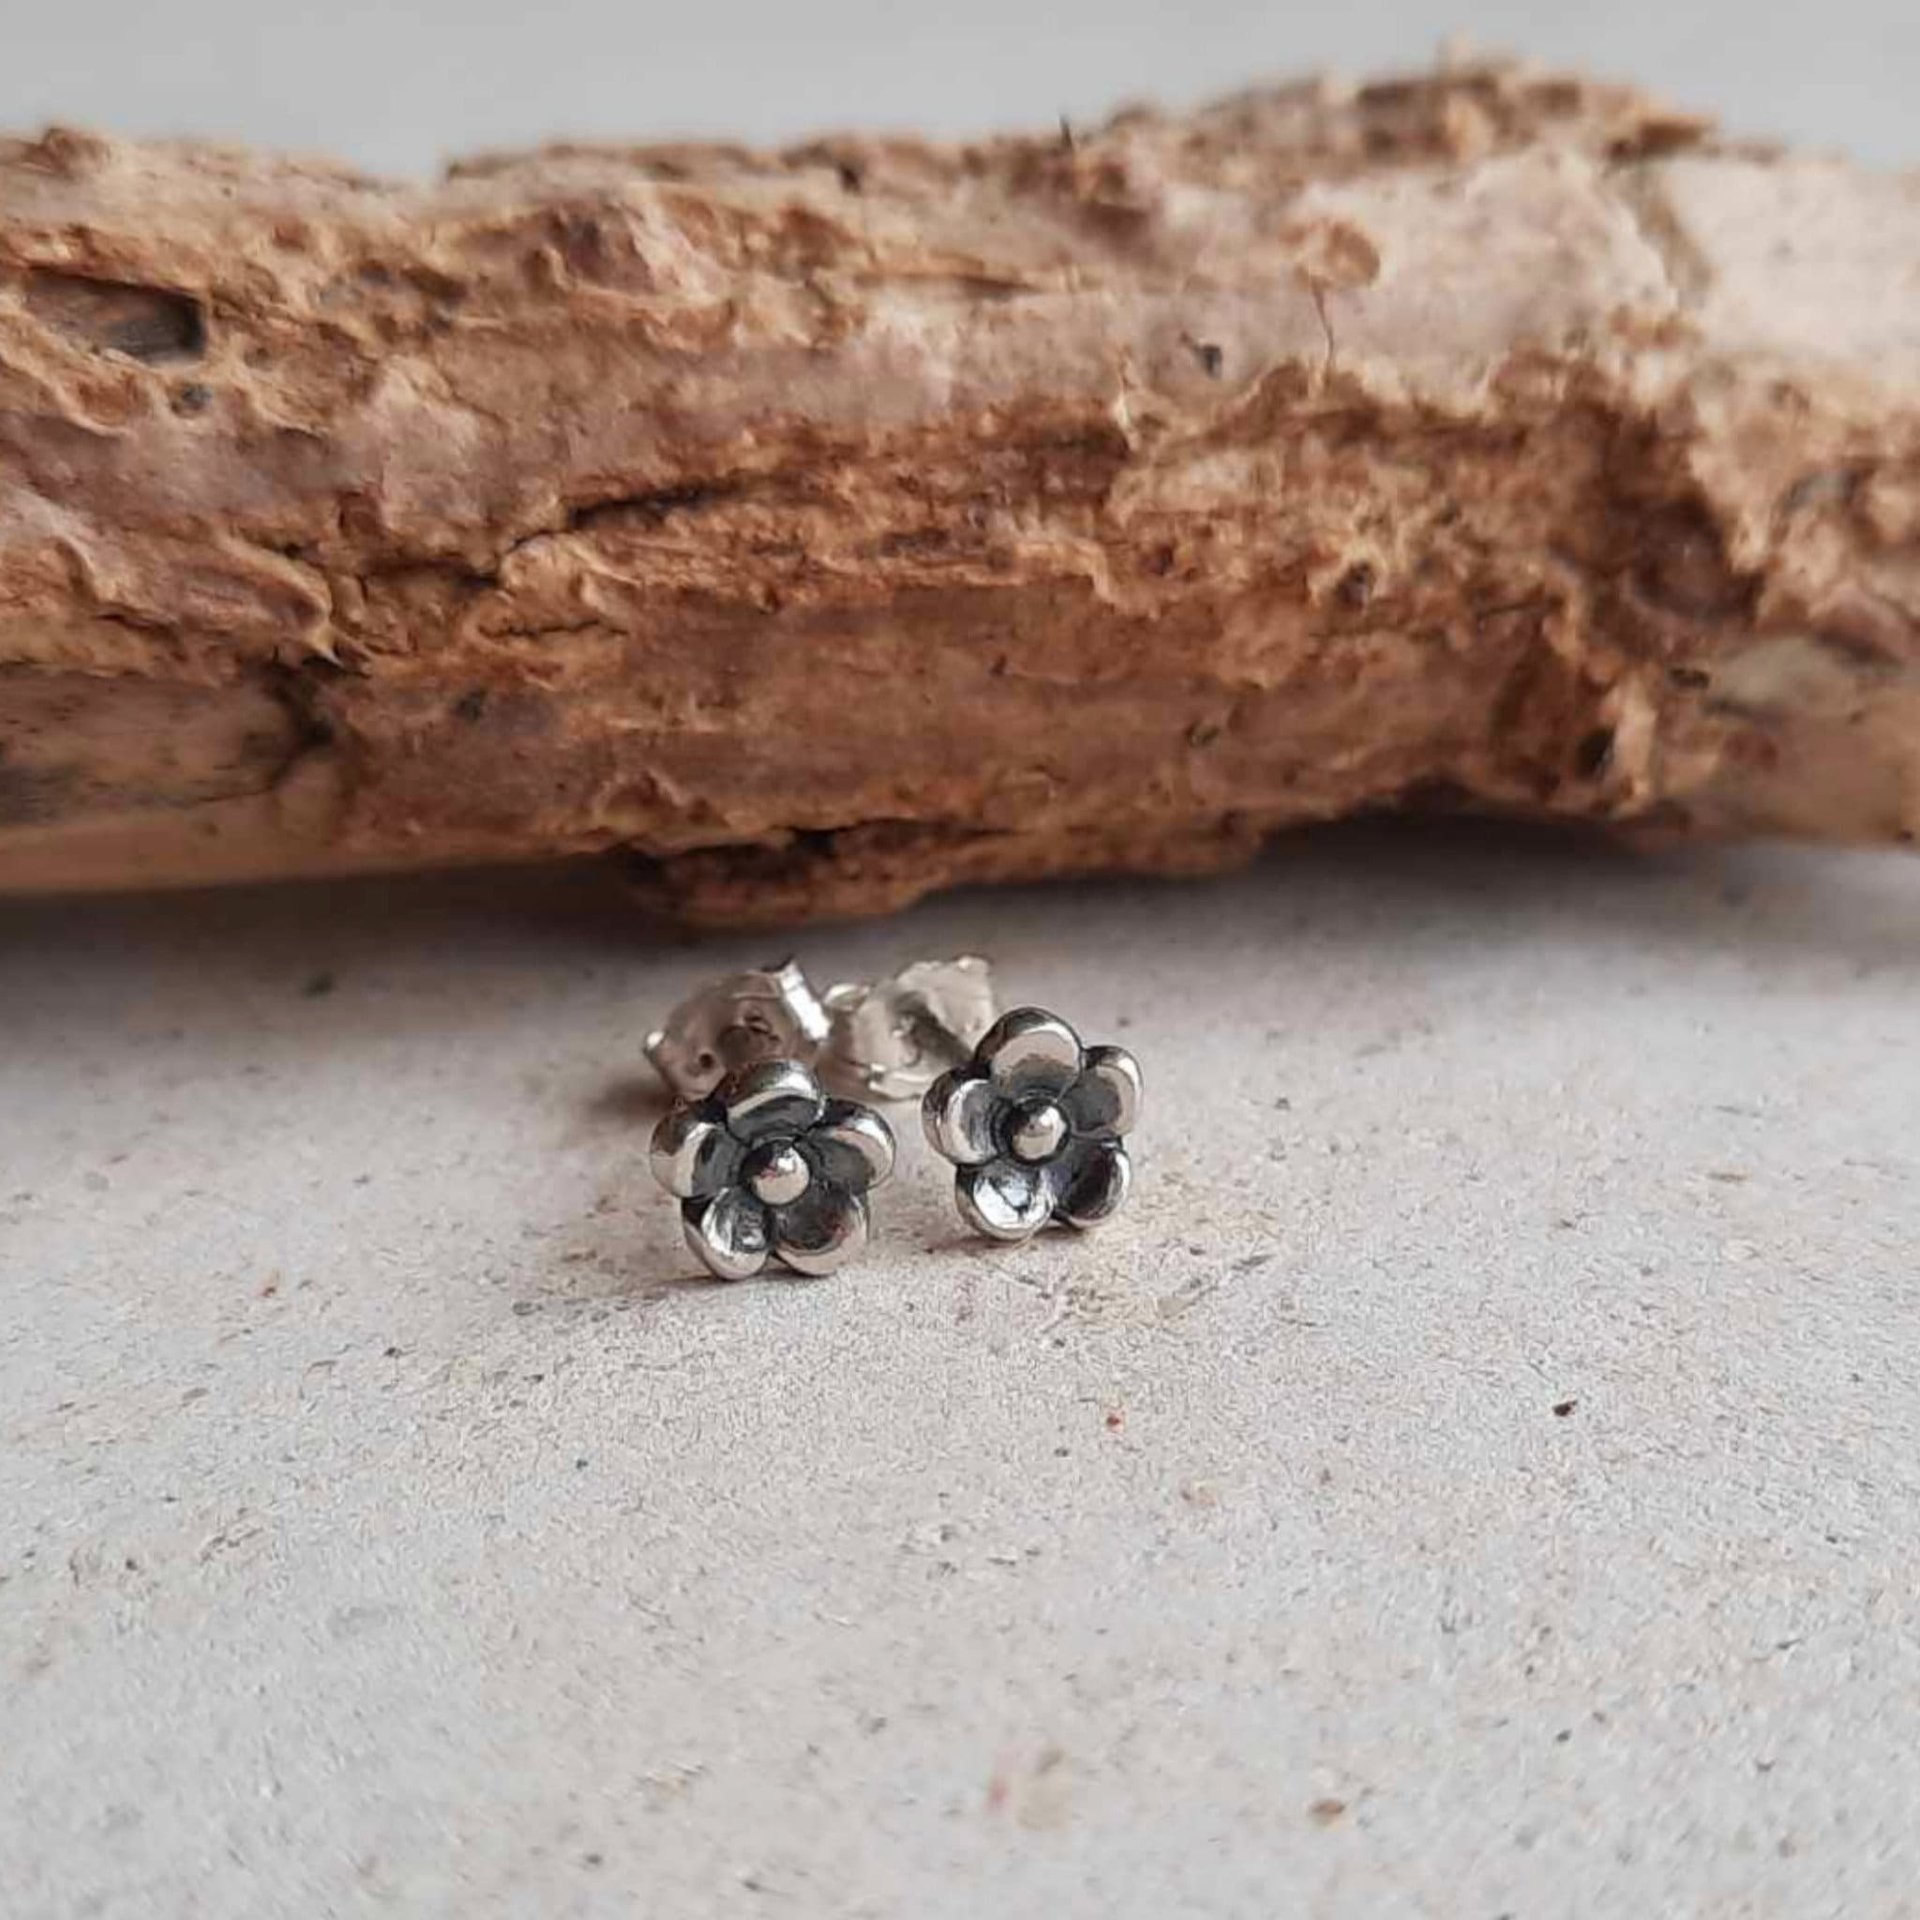 Mini fine silver forget me not stud earrings, artisan made from eco friendly precious metal clay by The Tiny Tree Frog Jewellery